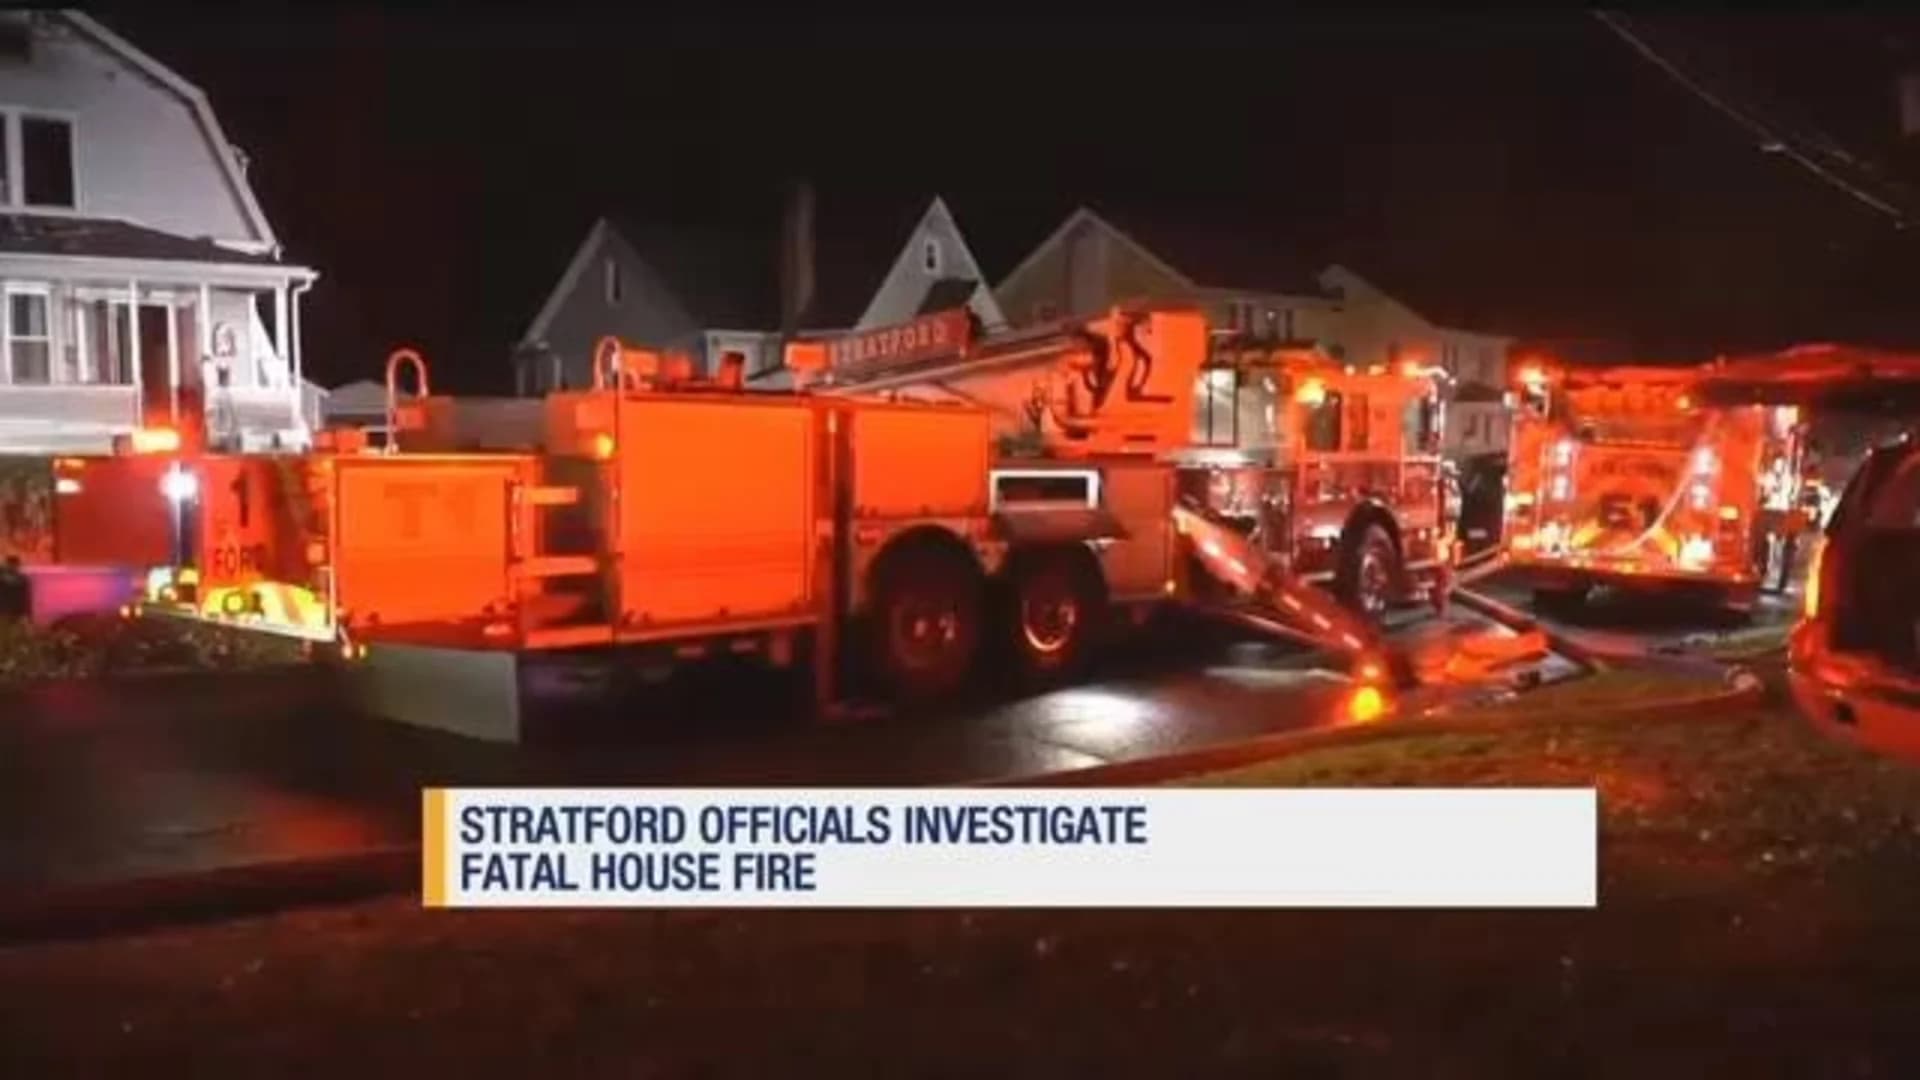 Family, friends mourn loss of man killed in Stratford fire